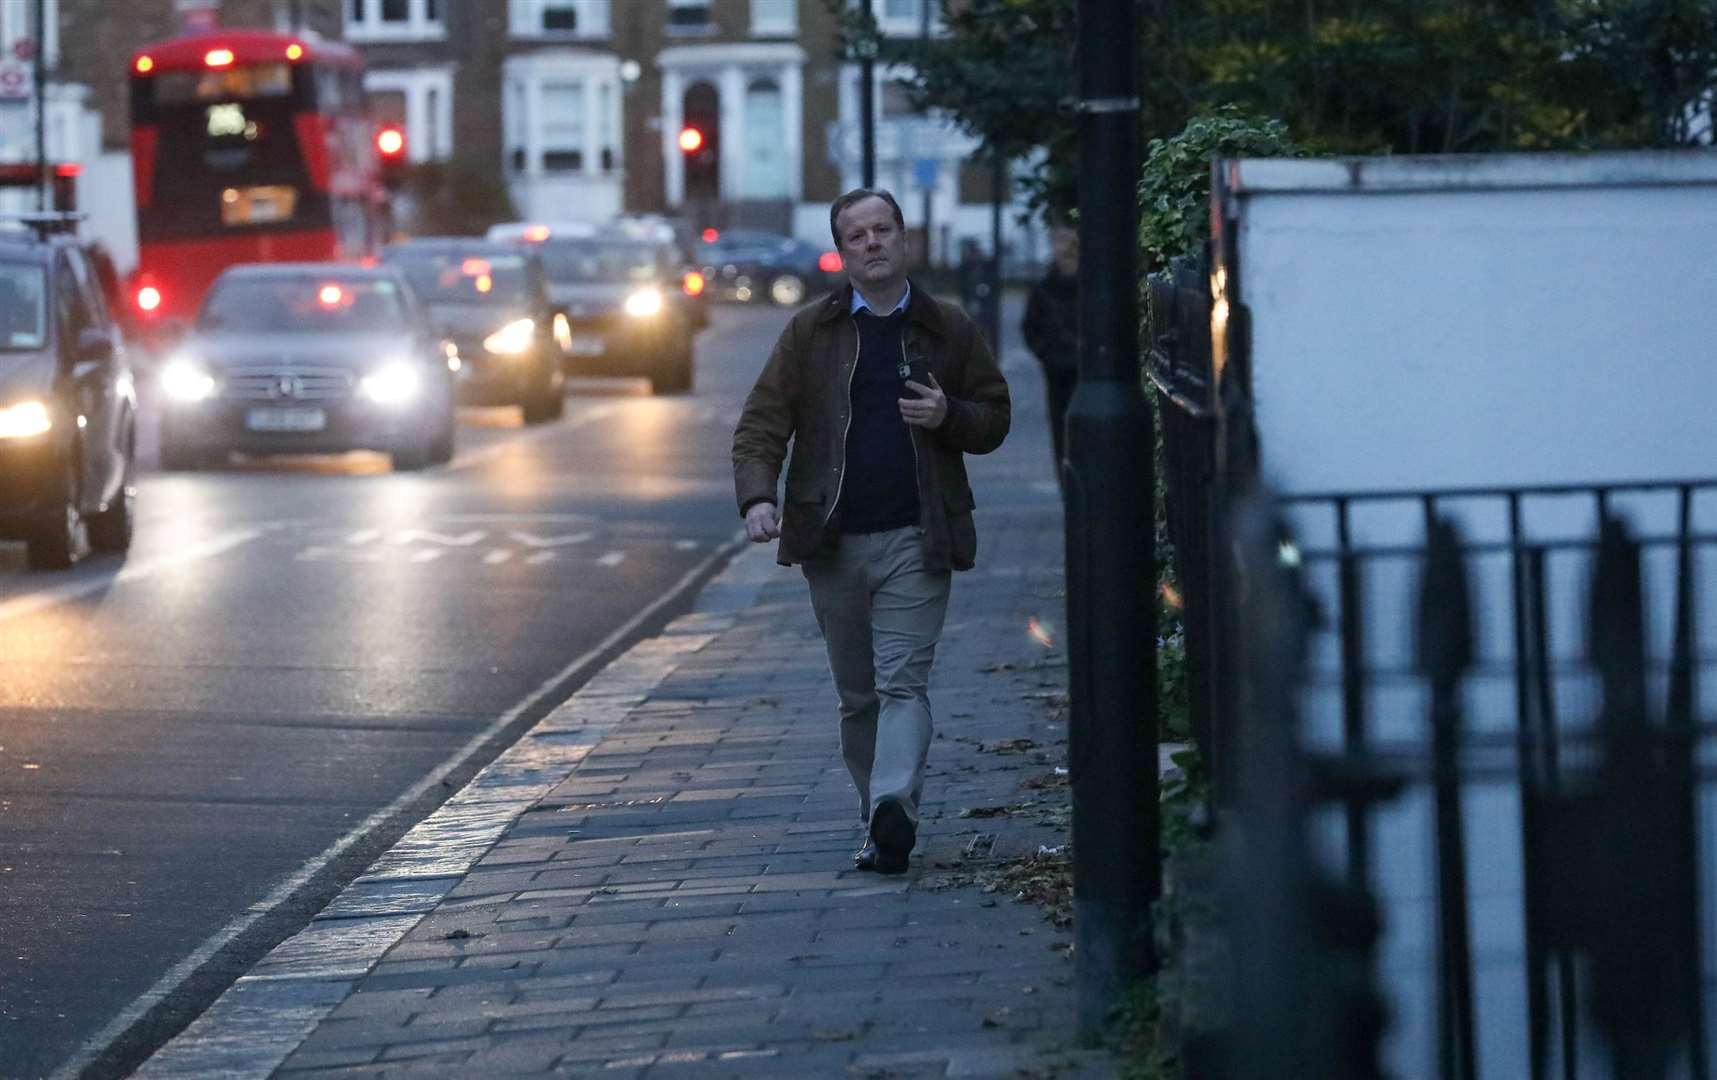 Ex-MP Charlie Elphicke pictured recently near his Fulham home. Picture: UKNIP